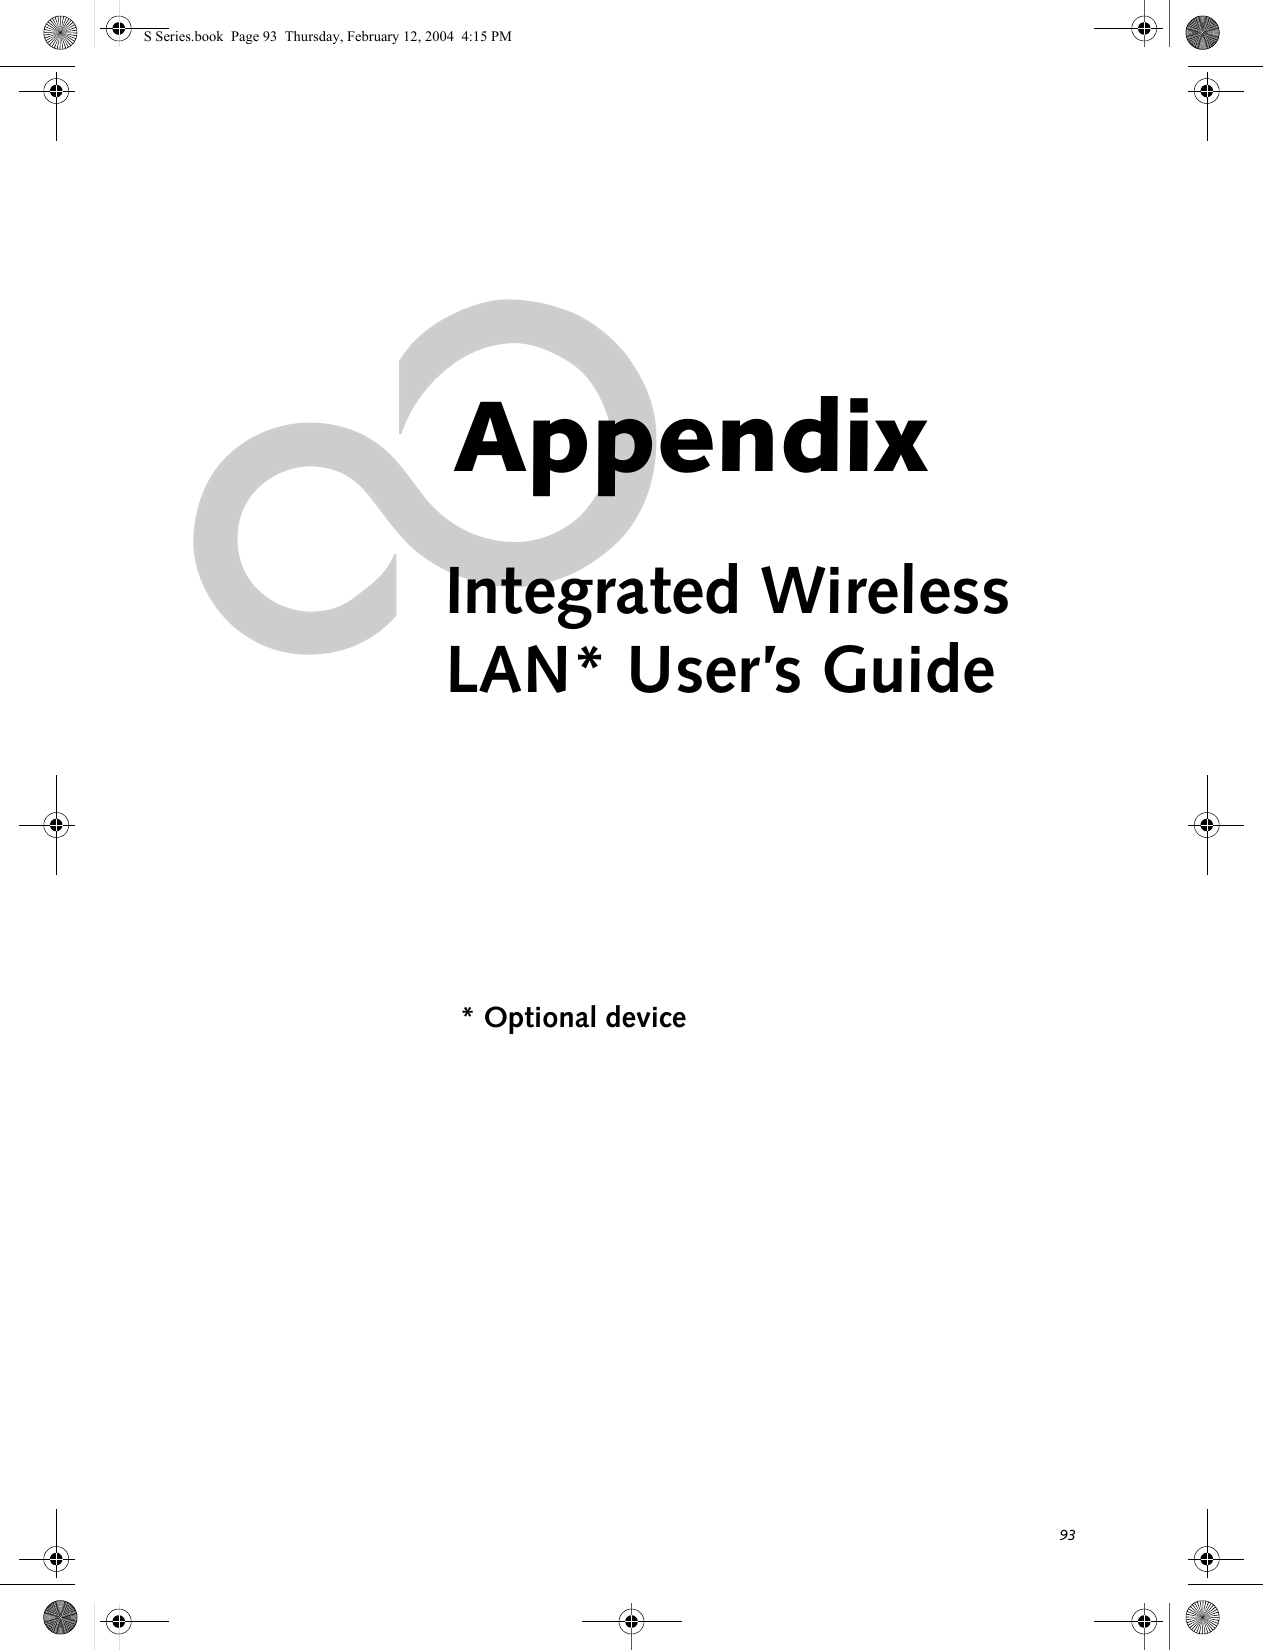 93AppendixIntegrated WirelessLAN* User’s Guide* Optional deviceS Series.book  Page 93  Thursday, February 12, 2004  4:15 PM